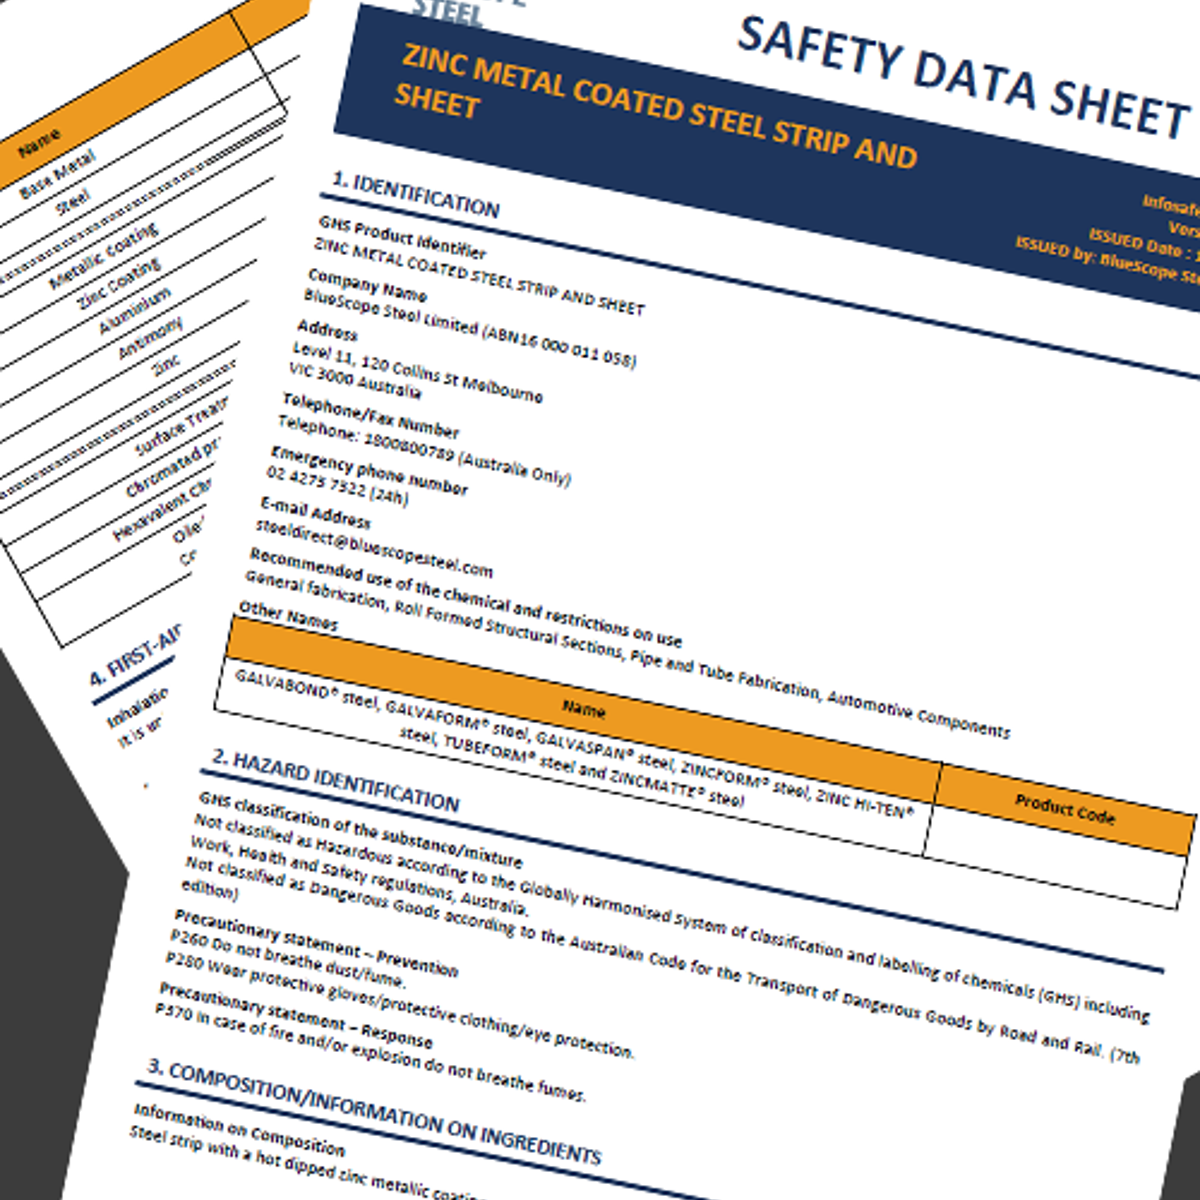 Millinery Product Safety Data - MSDS - Millinery Hub